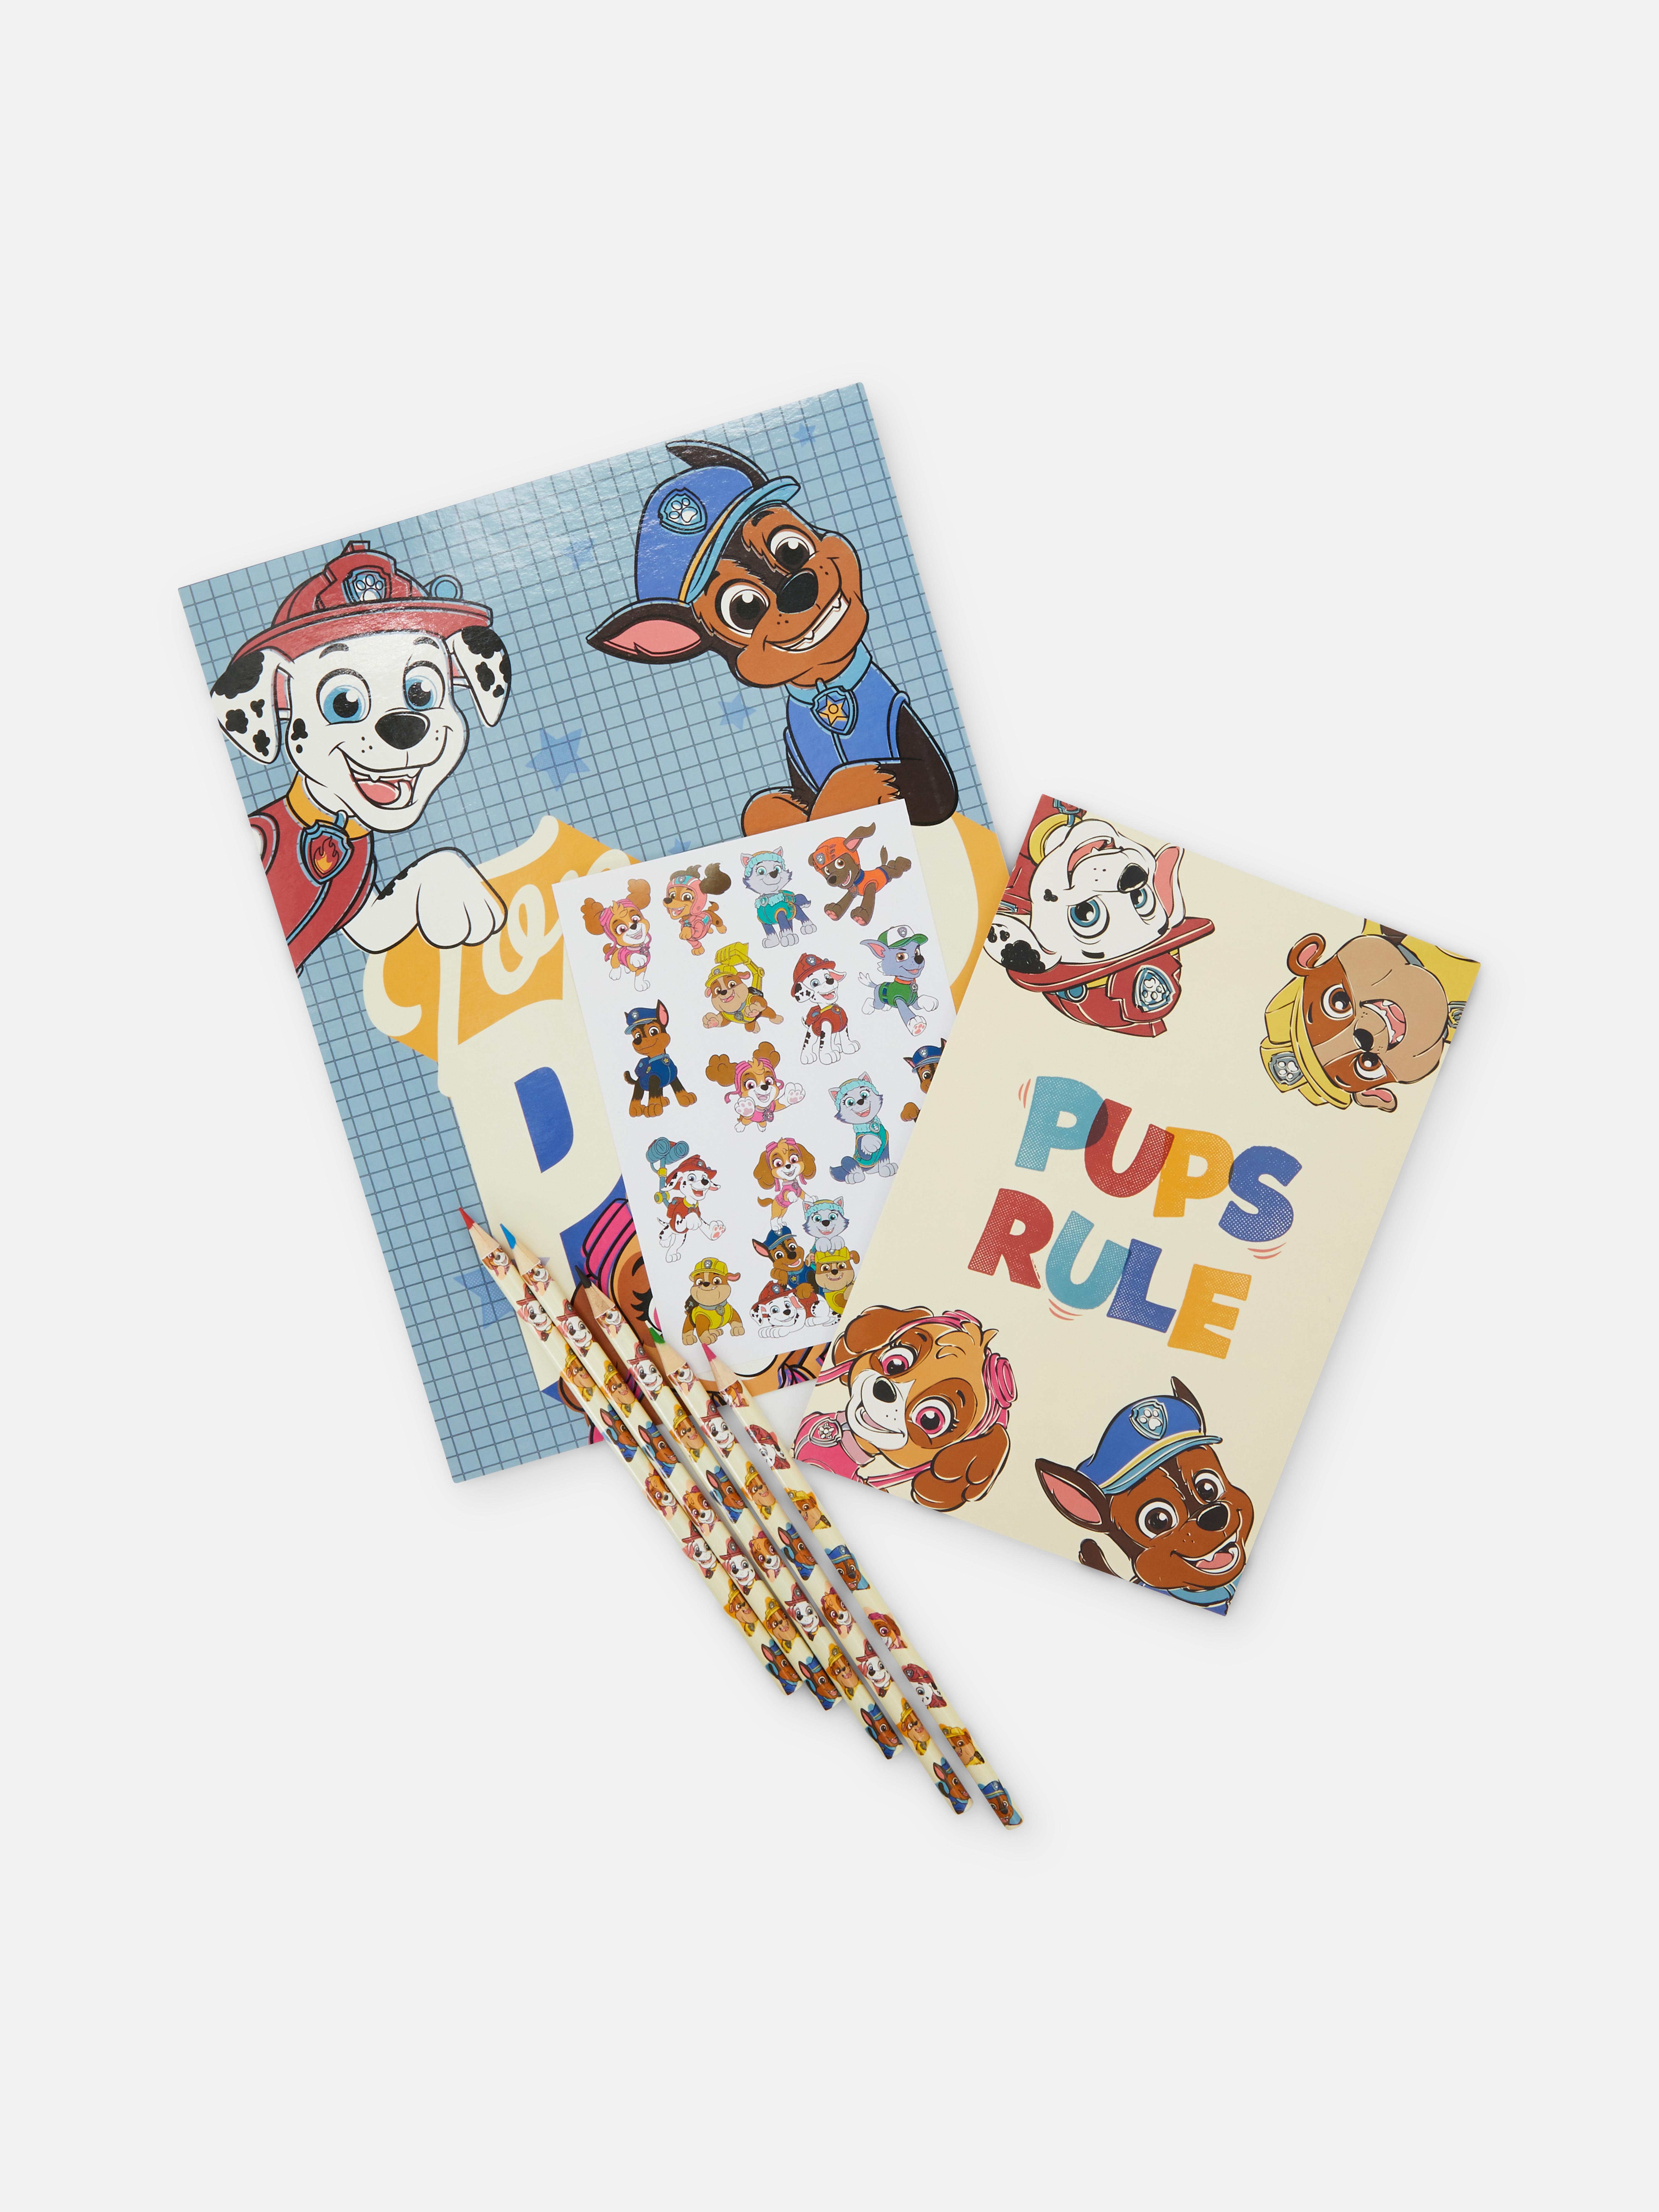 PAW Patrol Colouring Play Pack Set